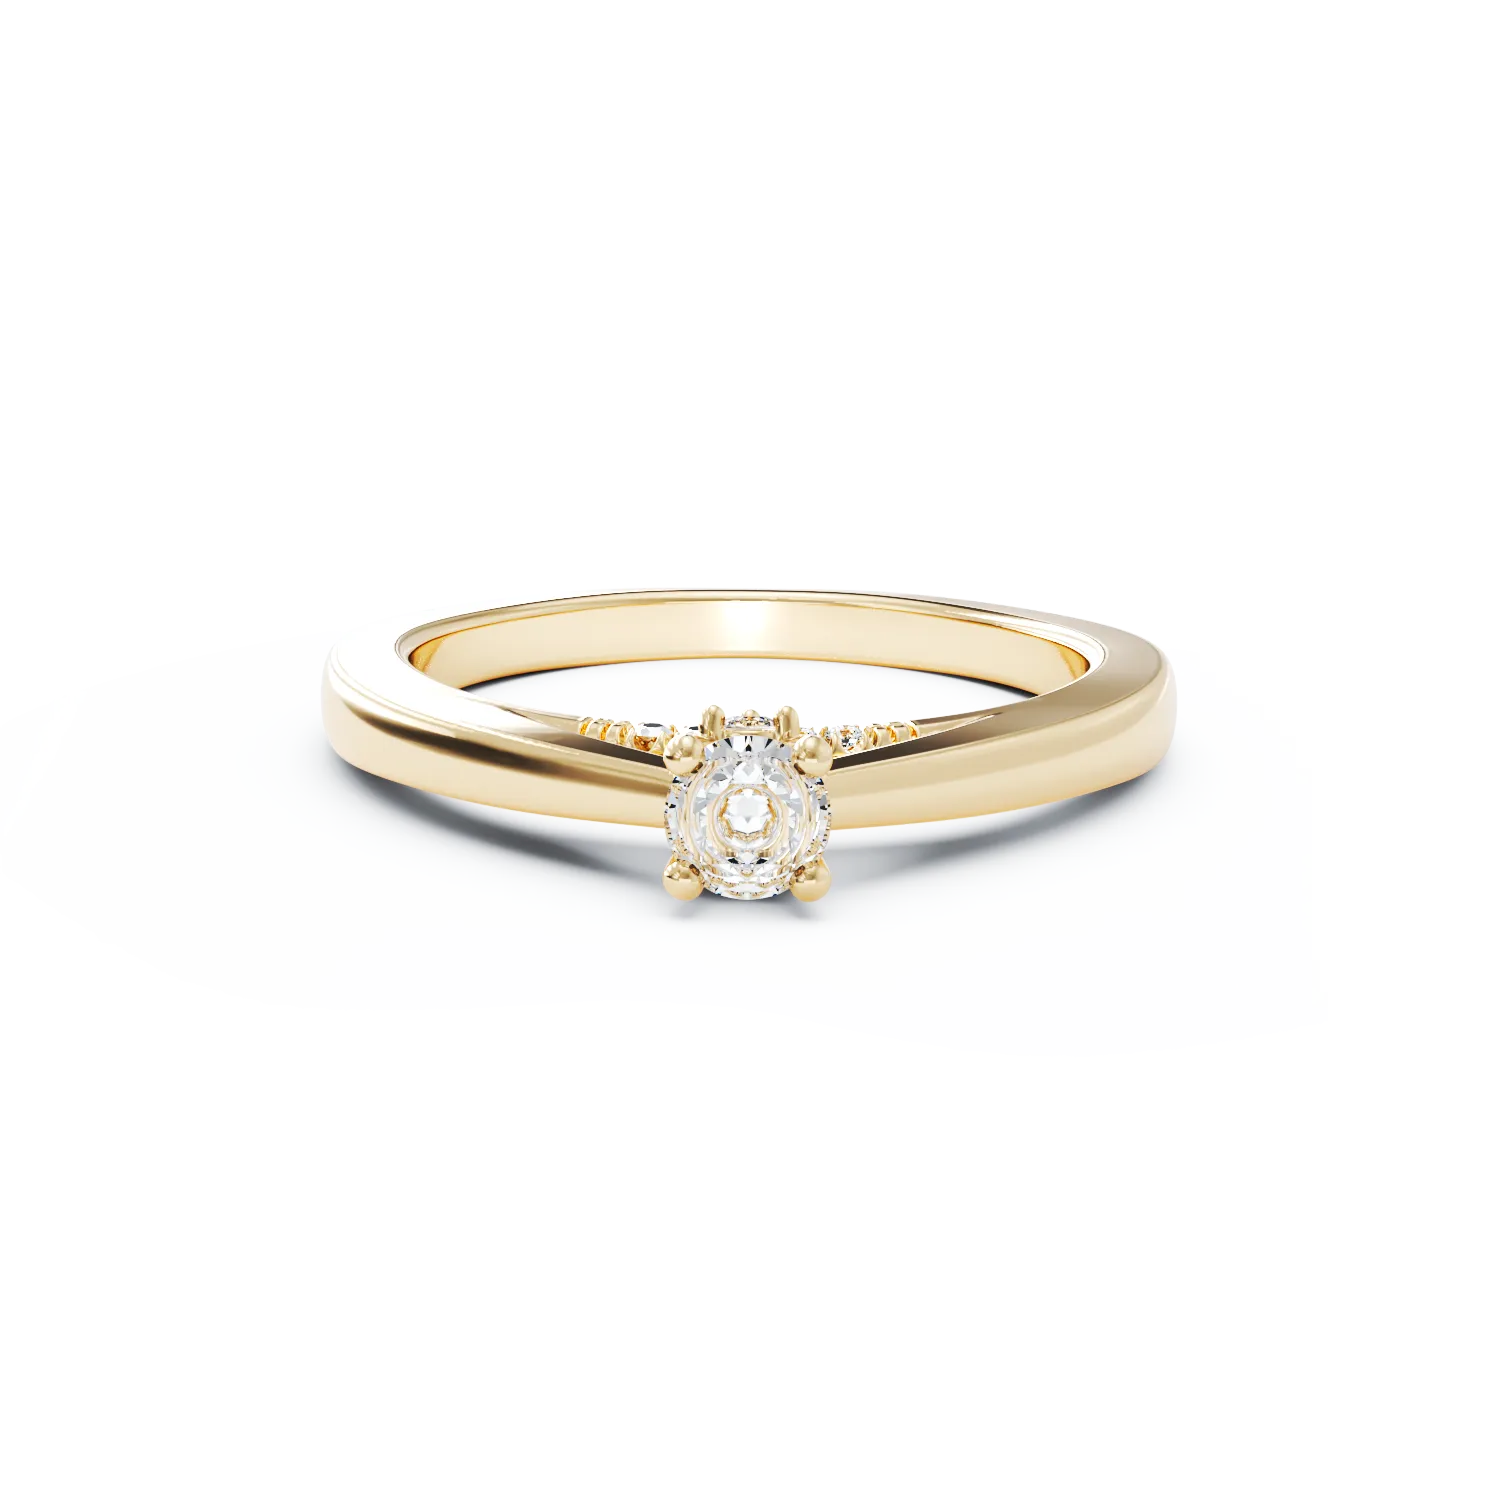 18K yellow gold engagement ring with 0.19ct diamond and 0.05ct diamonds